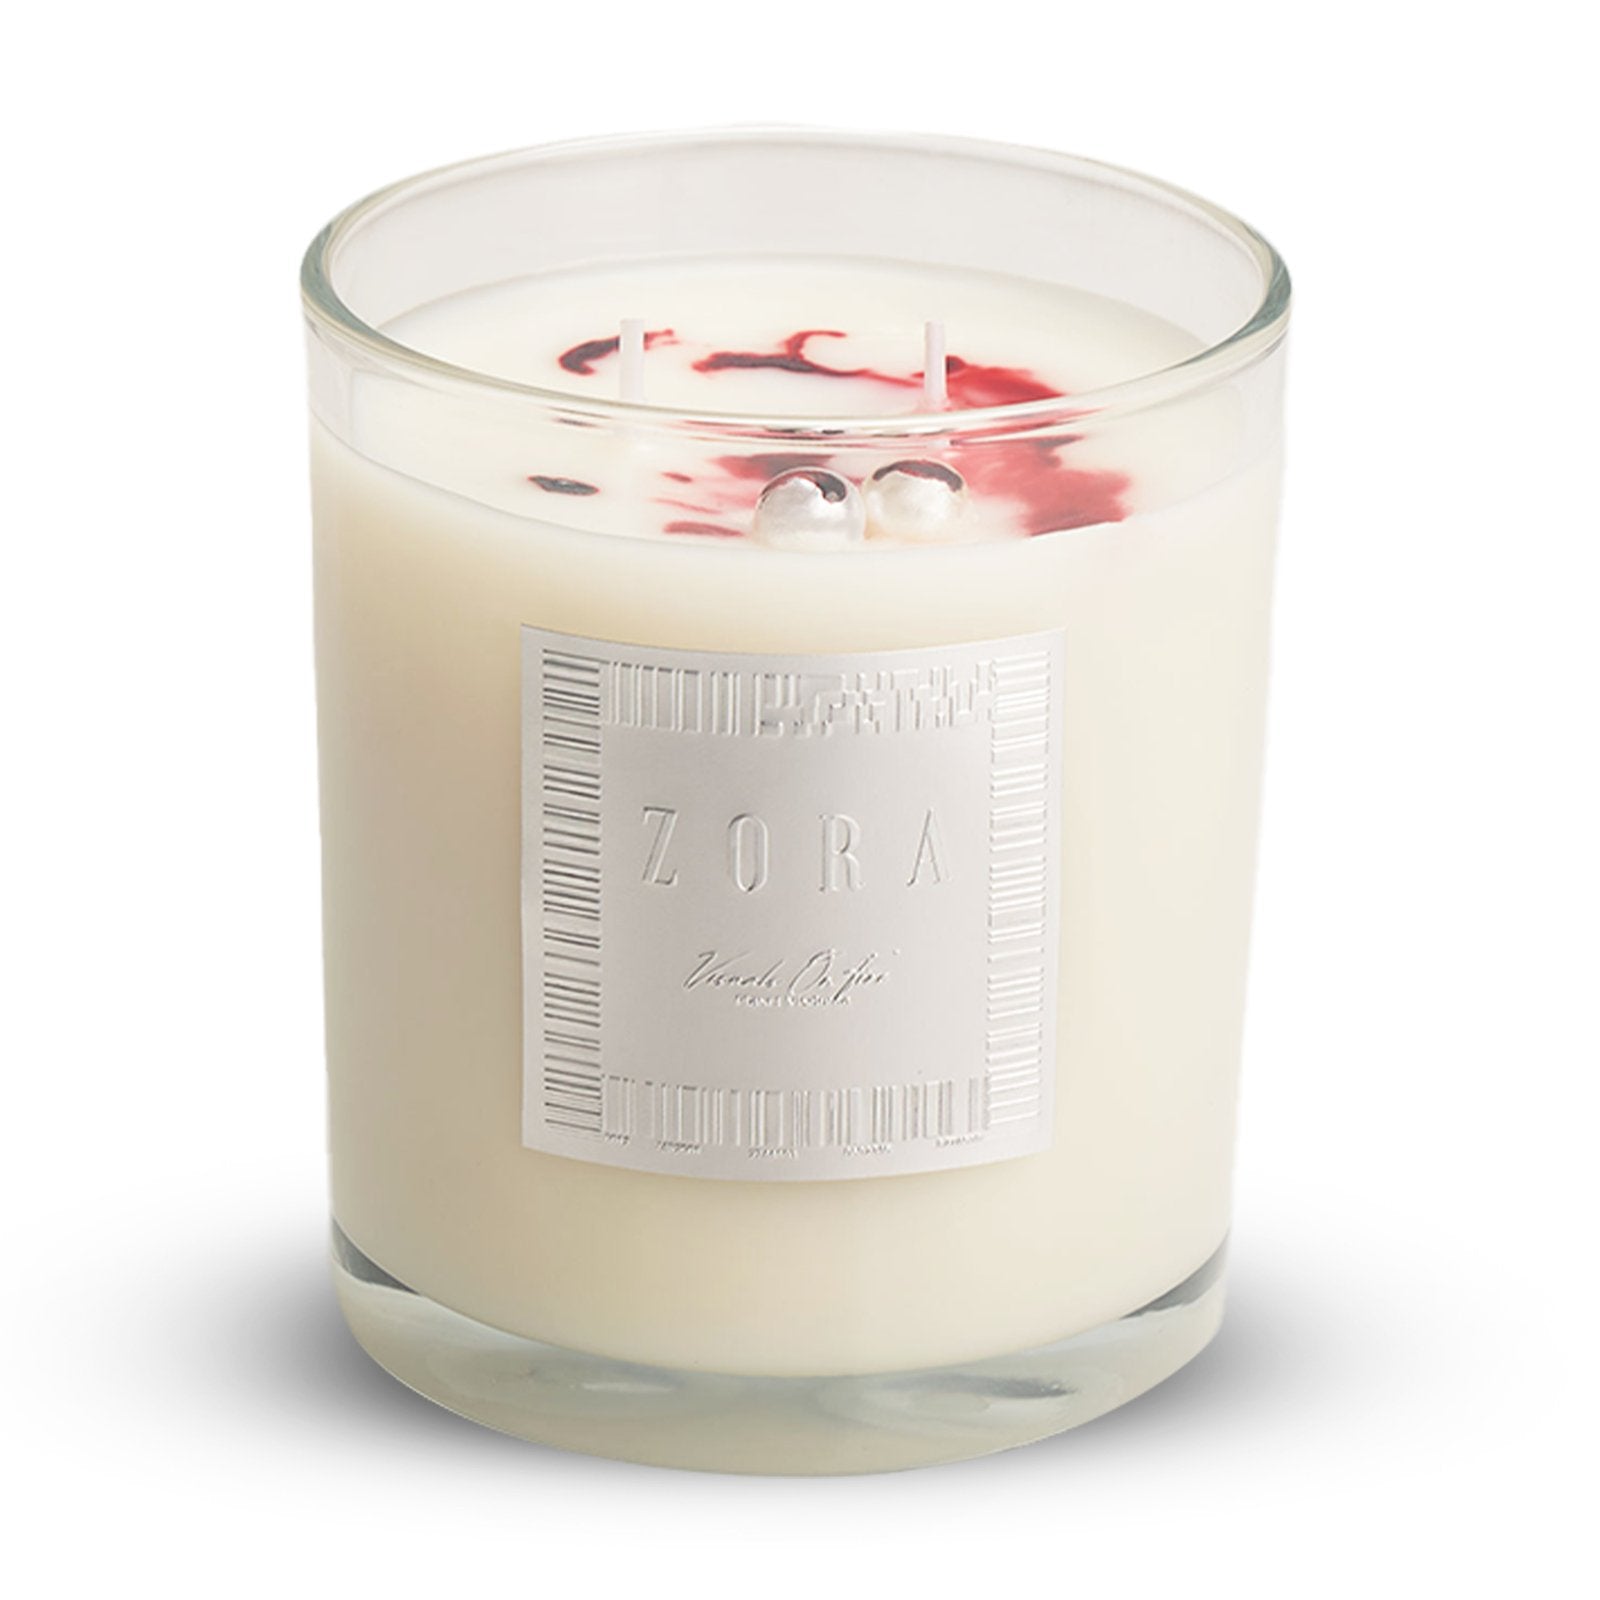 ZORA's 'For My Juliet' candle with blood-tinted pearls design